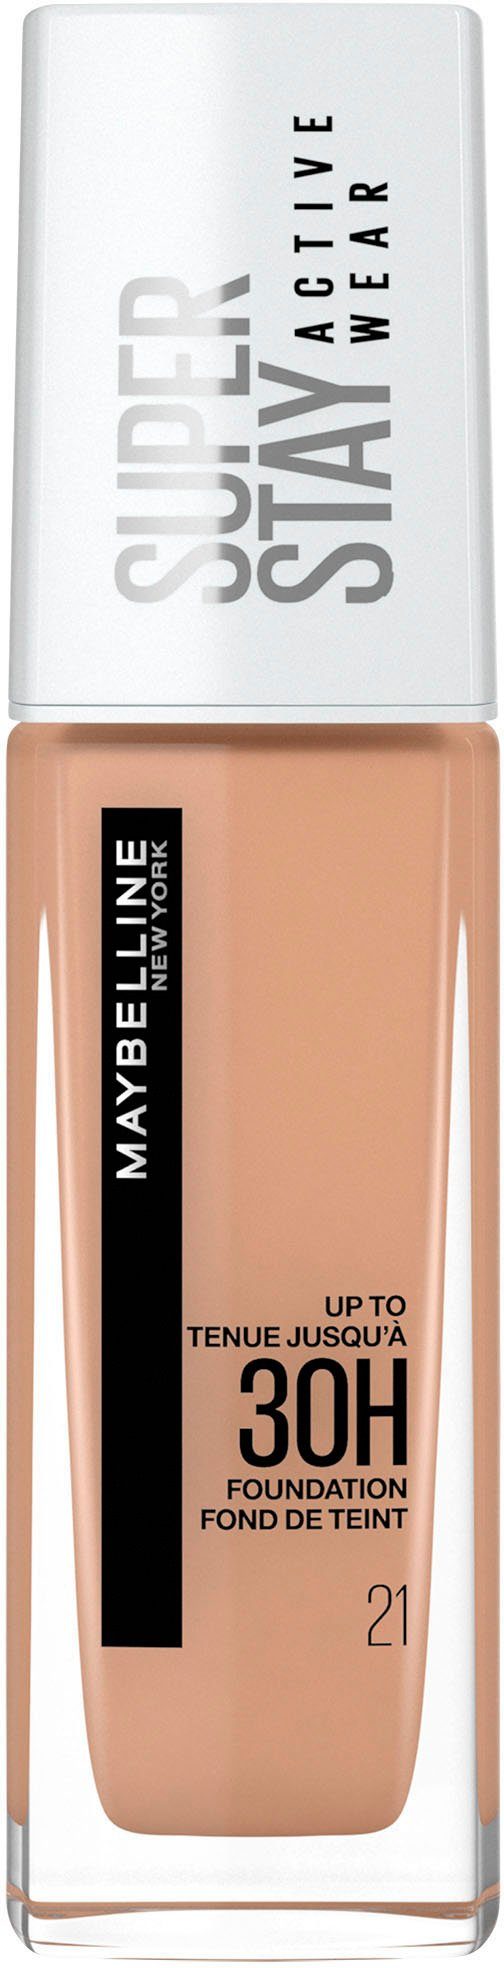 Wear 21 Stay Super YORK NEW Active MAYBELLINE Beige Nude Foundation